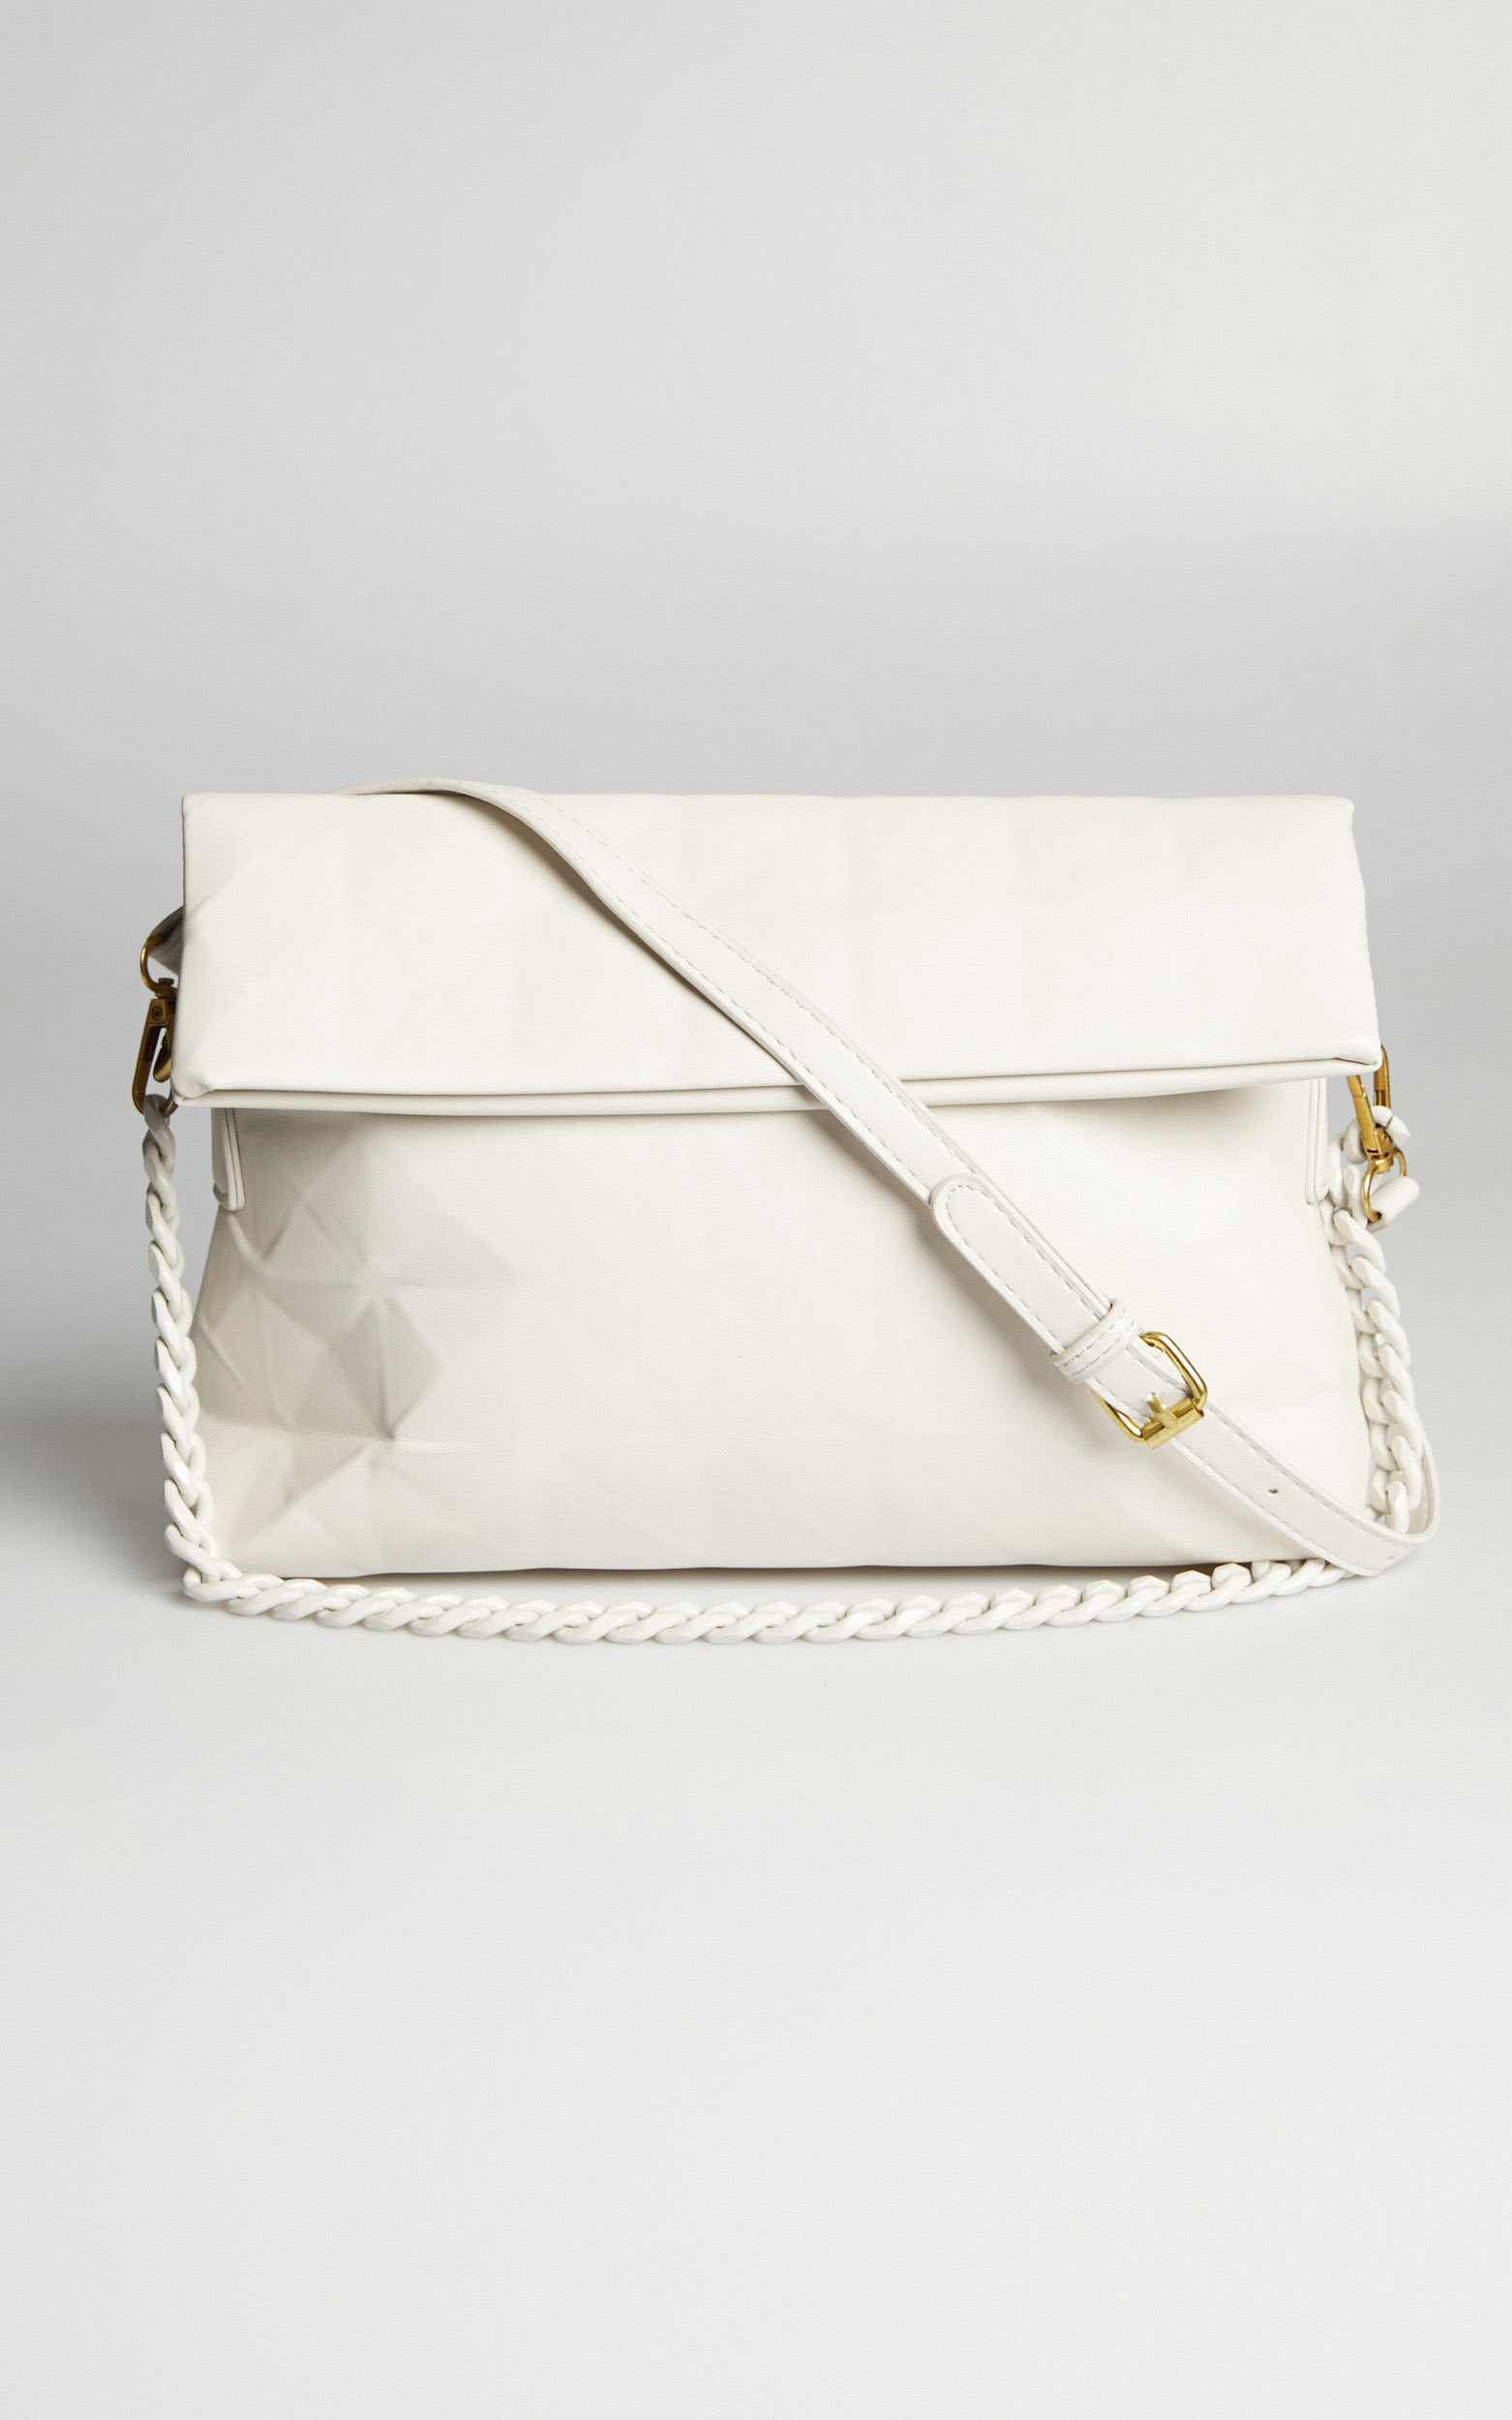 Marthena Chain Crossbody Bag in White - NoSize, WHT1, hi-res image number null